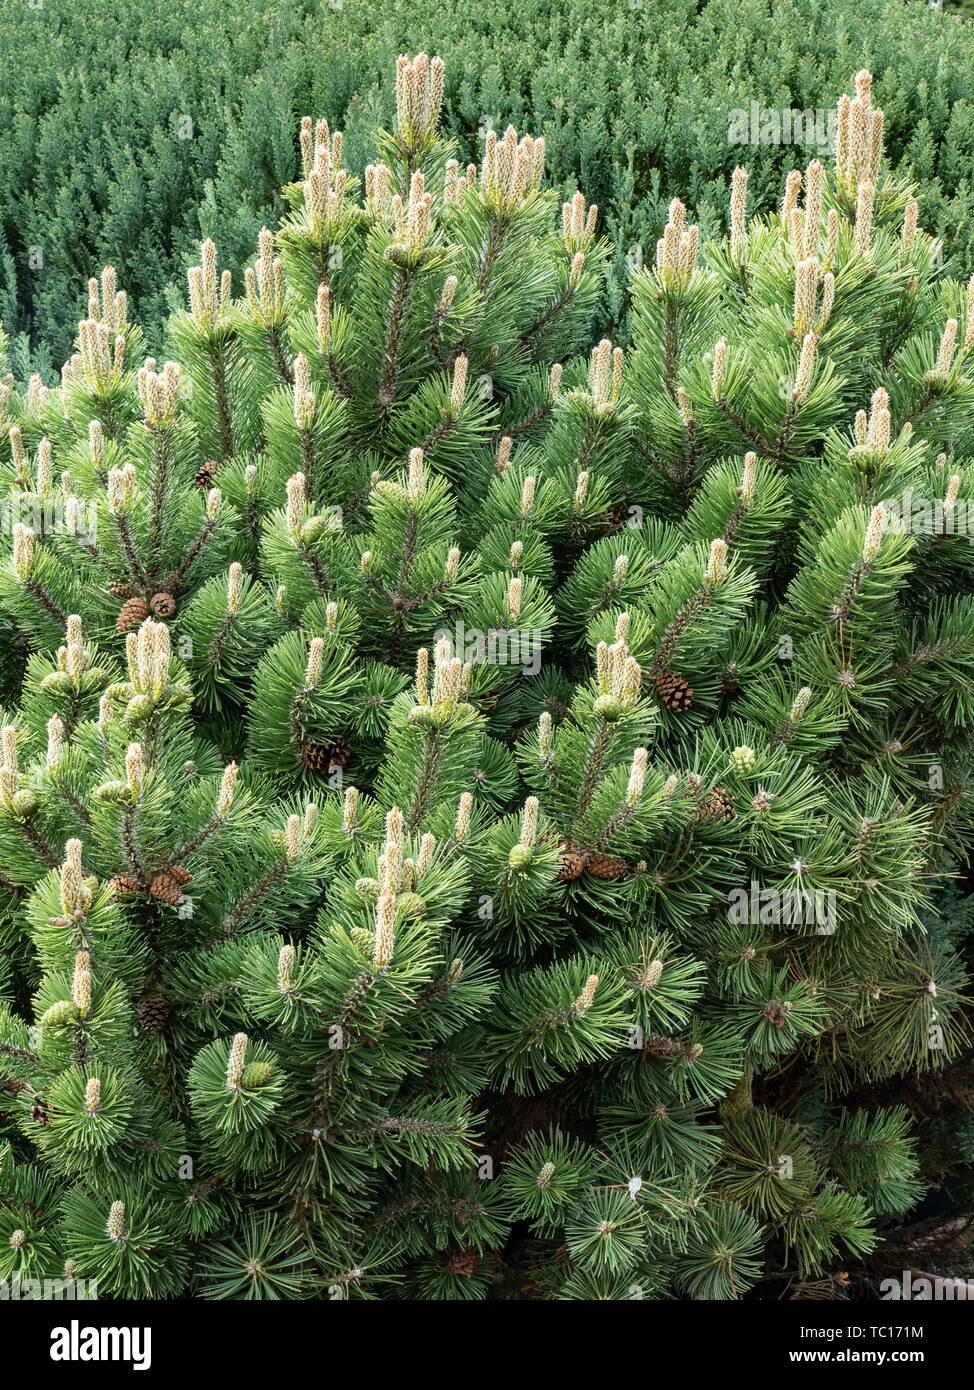 A large plant of Pinus mugo showing covered in male flowers Stock Photo